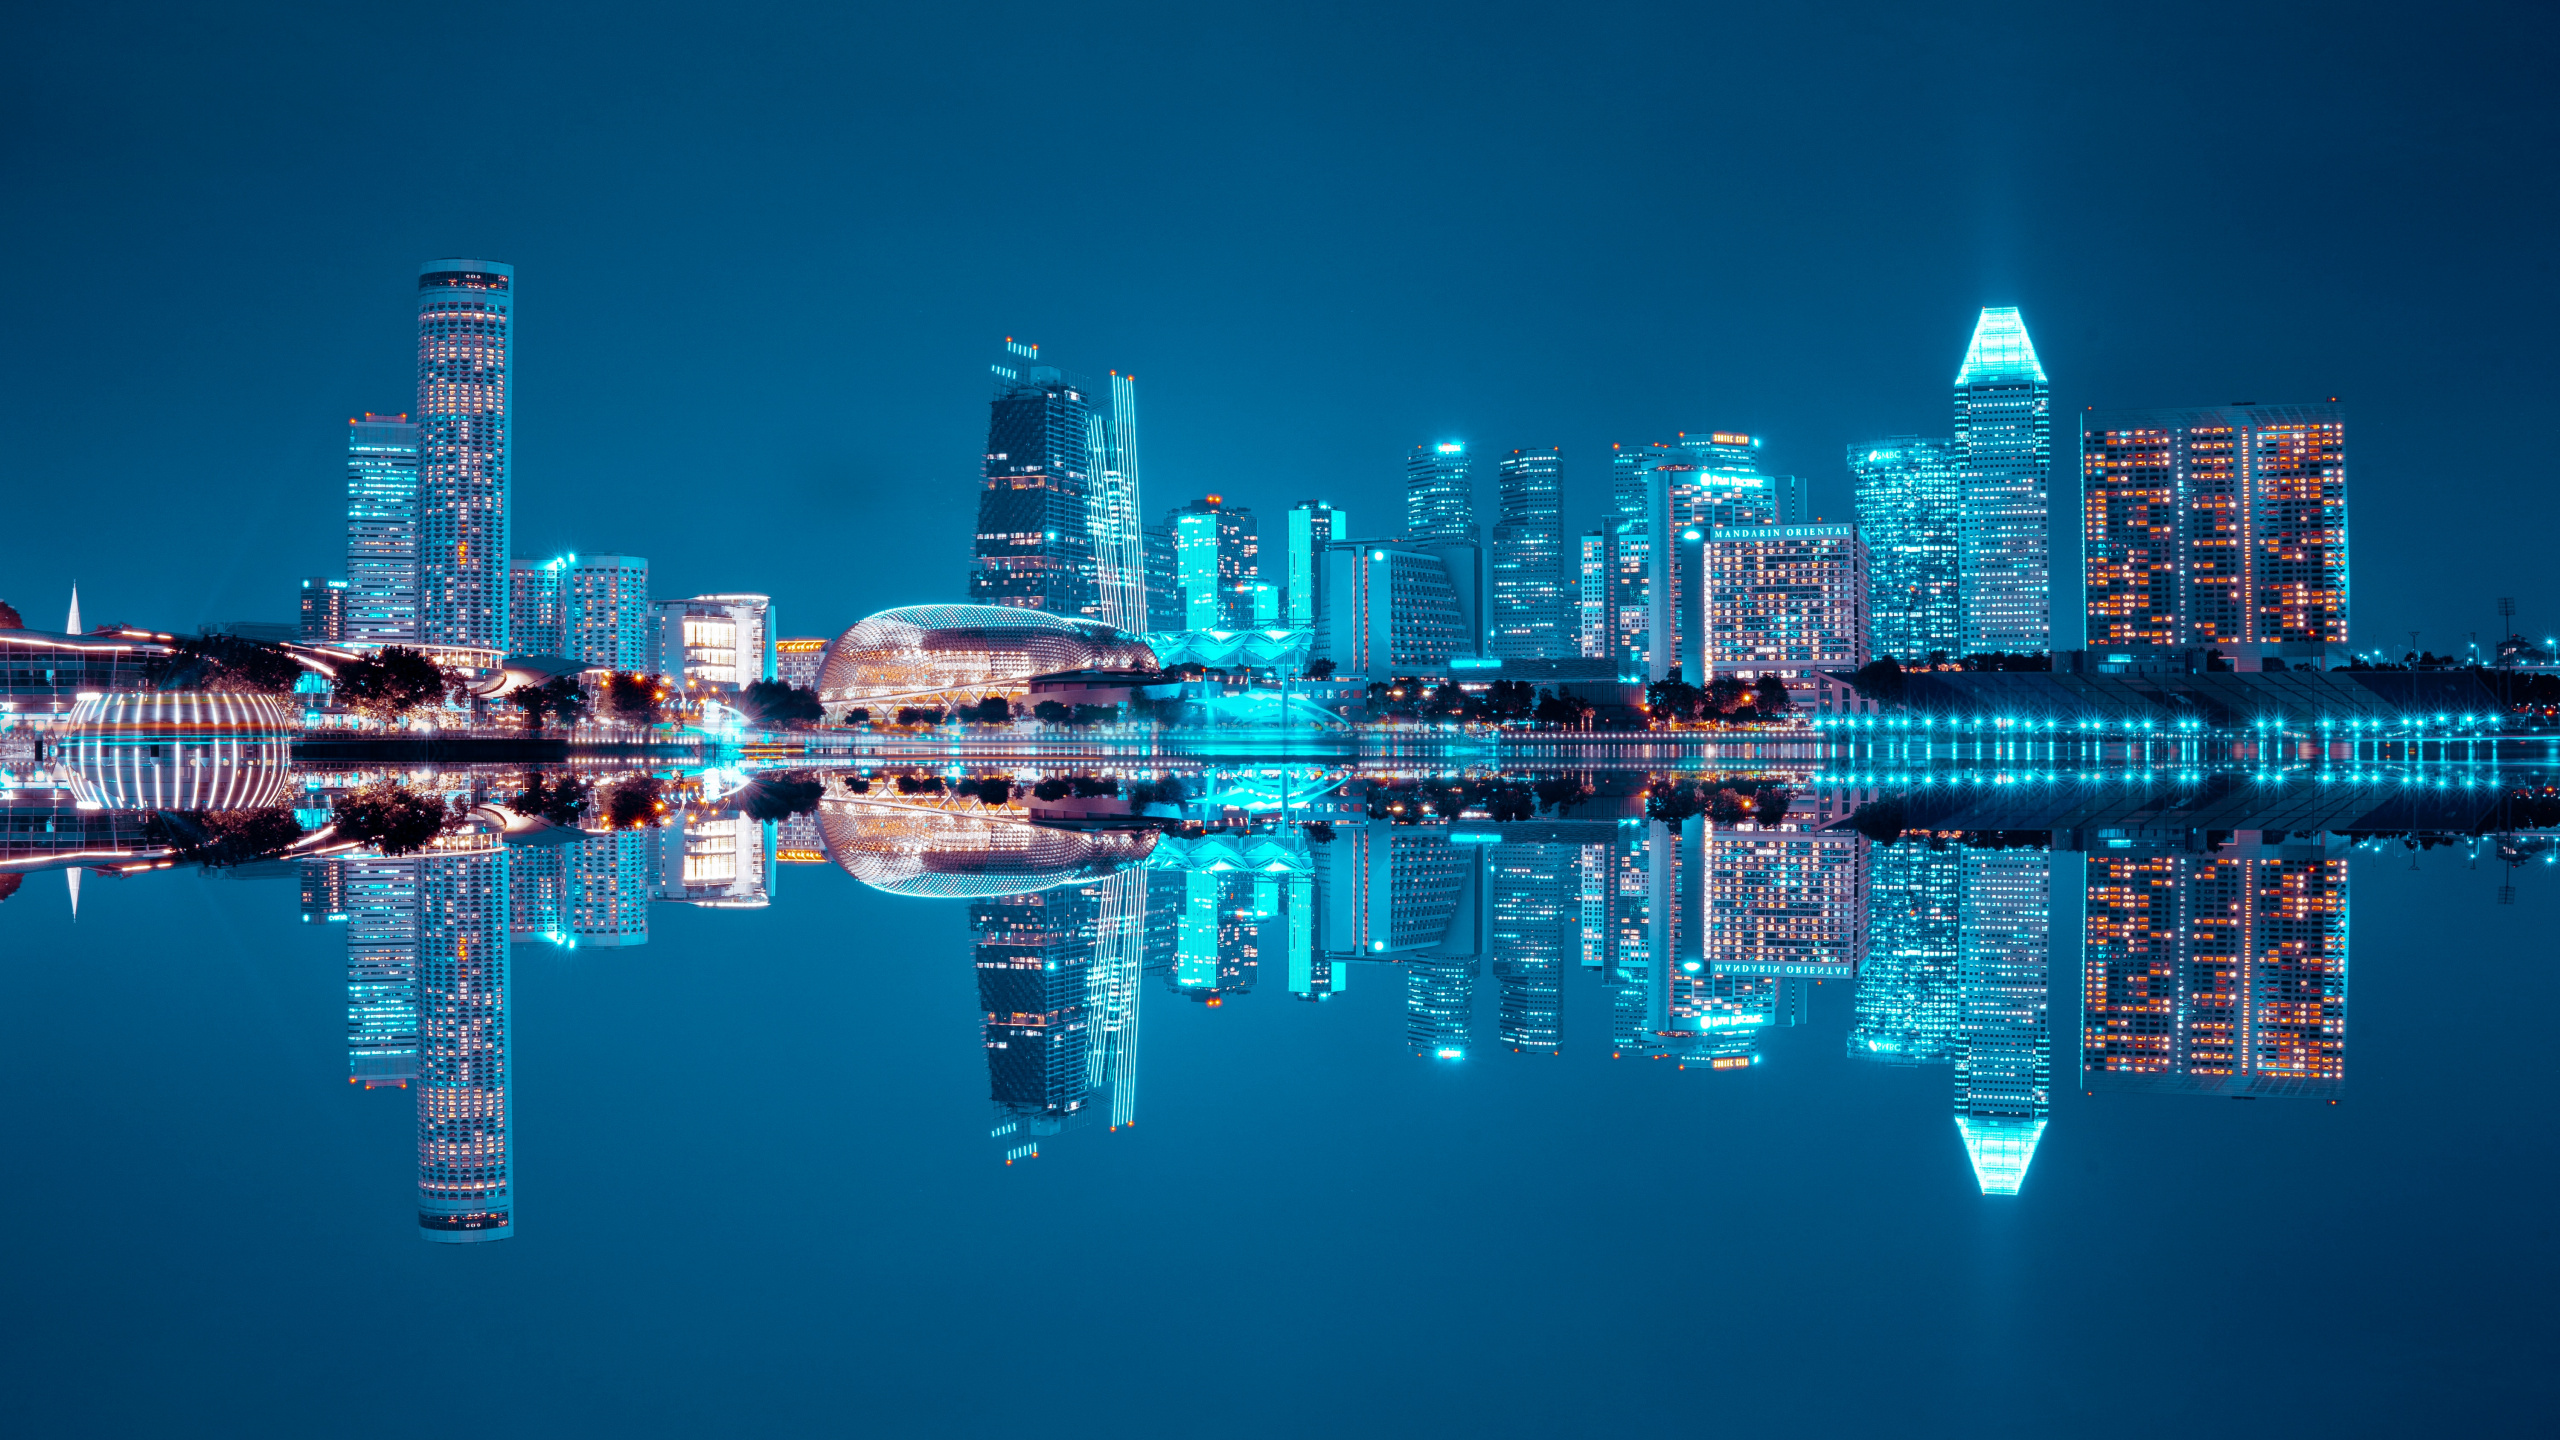 City Skyline Across Body of Water During Night Time. Wallpaper in 2560x1440 Resolution